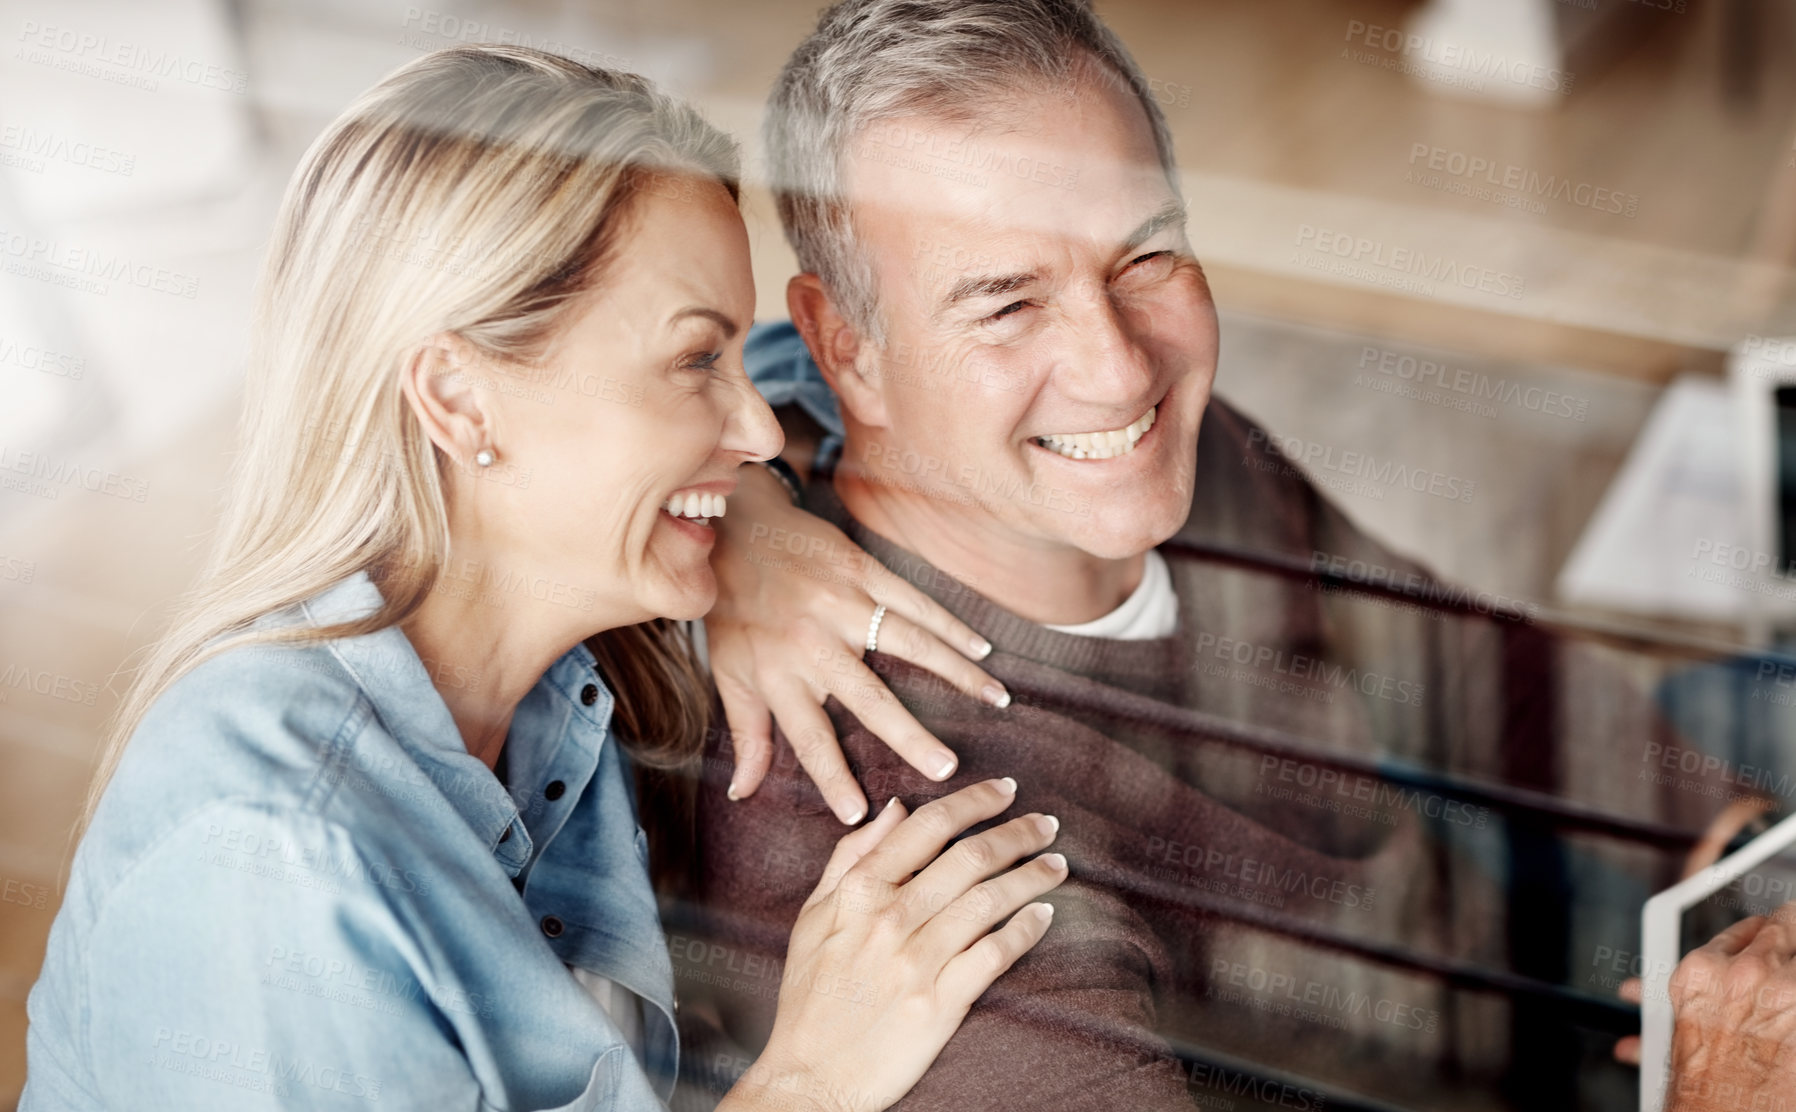 Buy stock photo Shot of a mature woman hugging her husband while he uses a digital tablet on the sofa at home